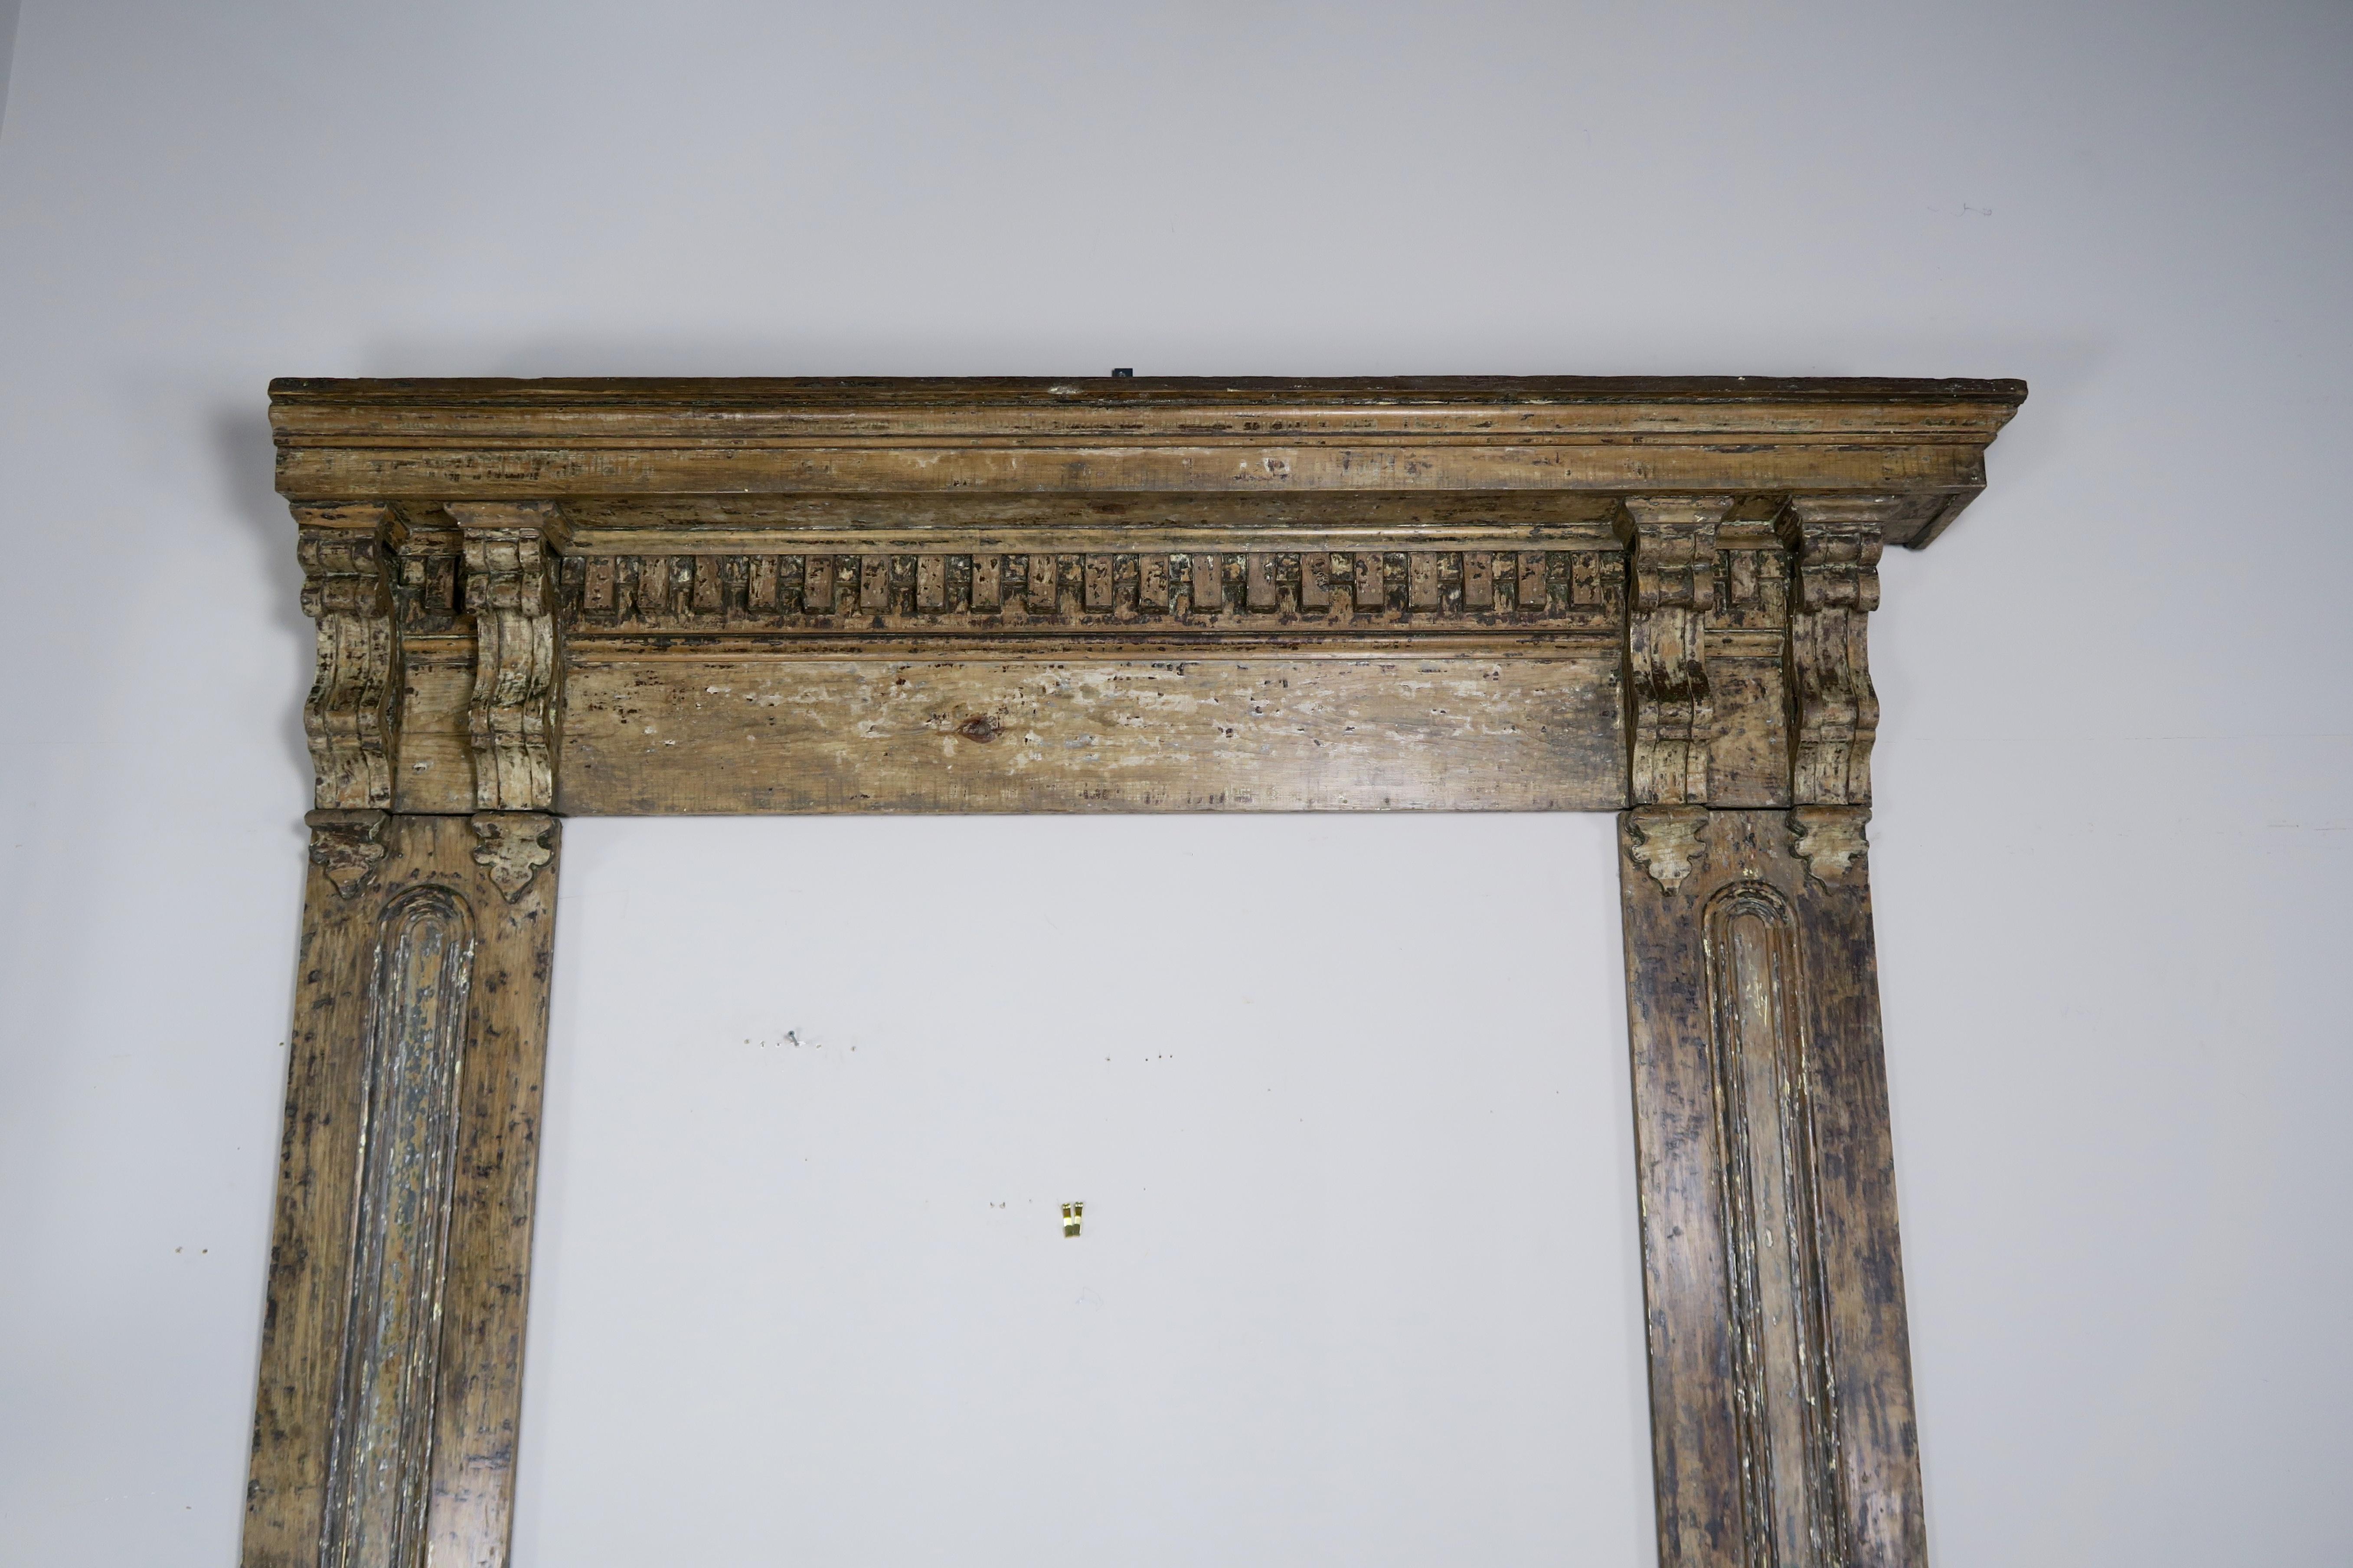 19th century French painted door surround with a beautiful worn patina. This surround can be built into your home or a custom mirror or headboard can be created from this fabulous architectural piece.